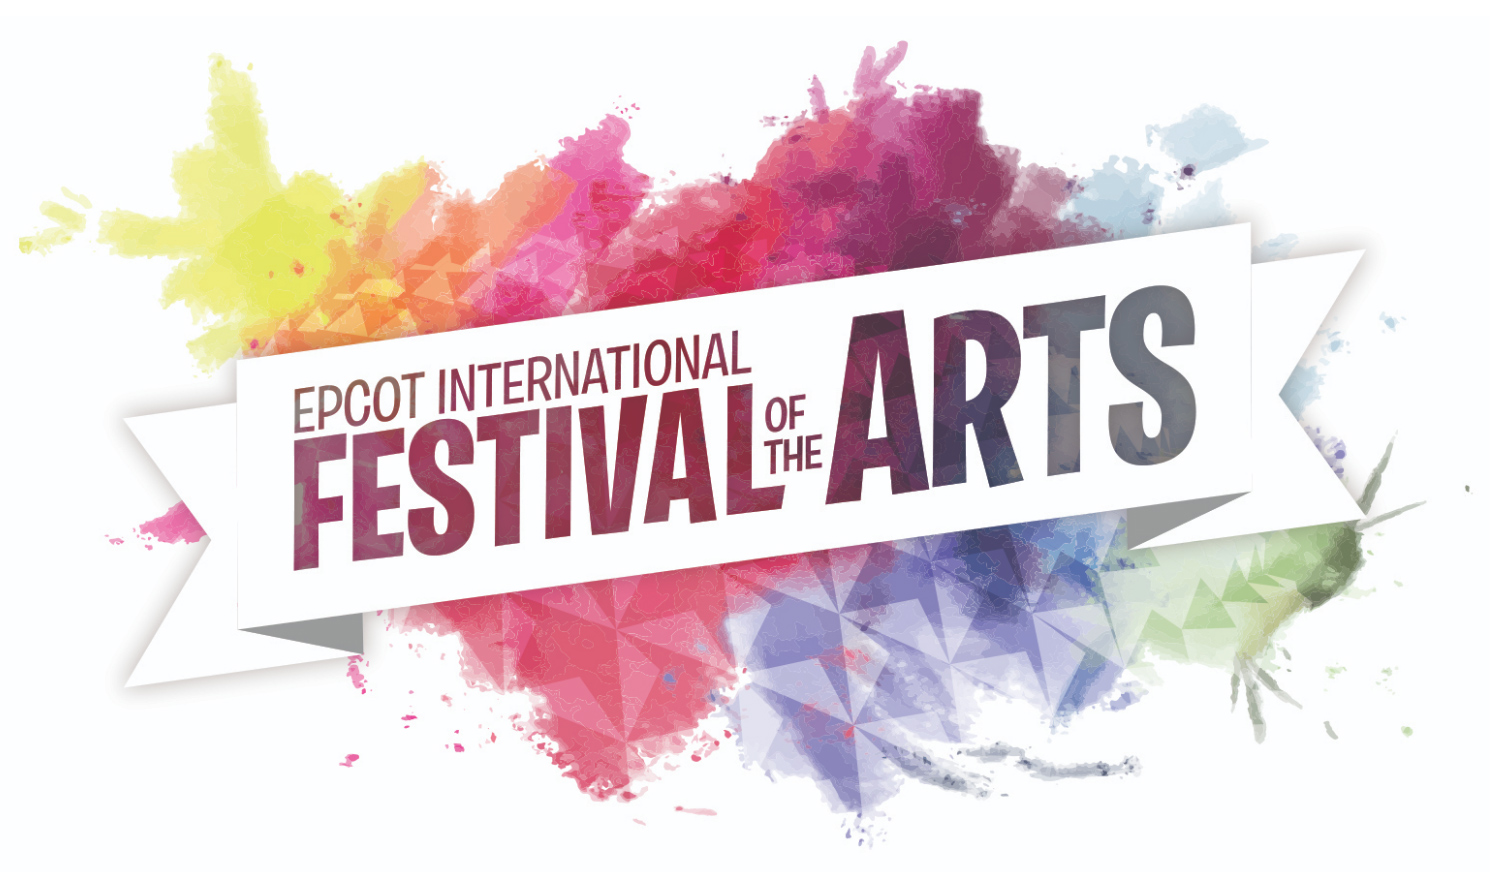 Colorful graphic of the Epcot® International Festival of the Arts logo.